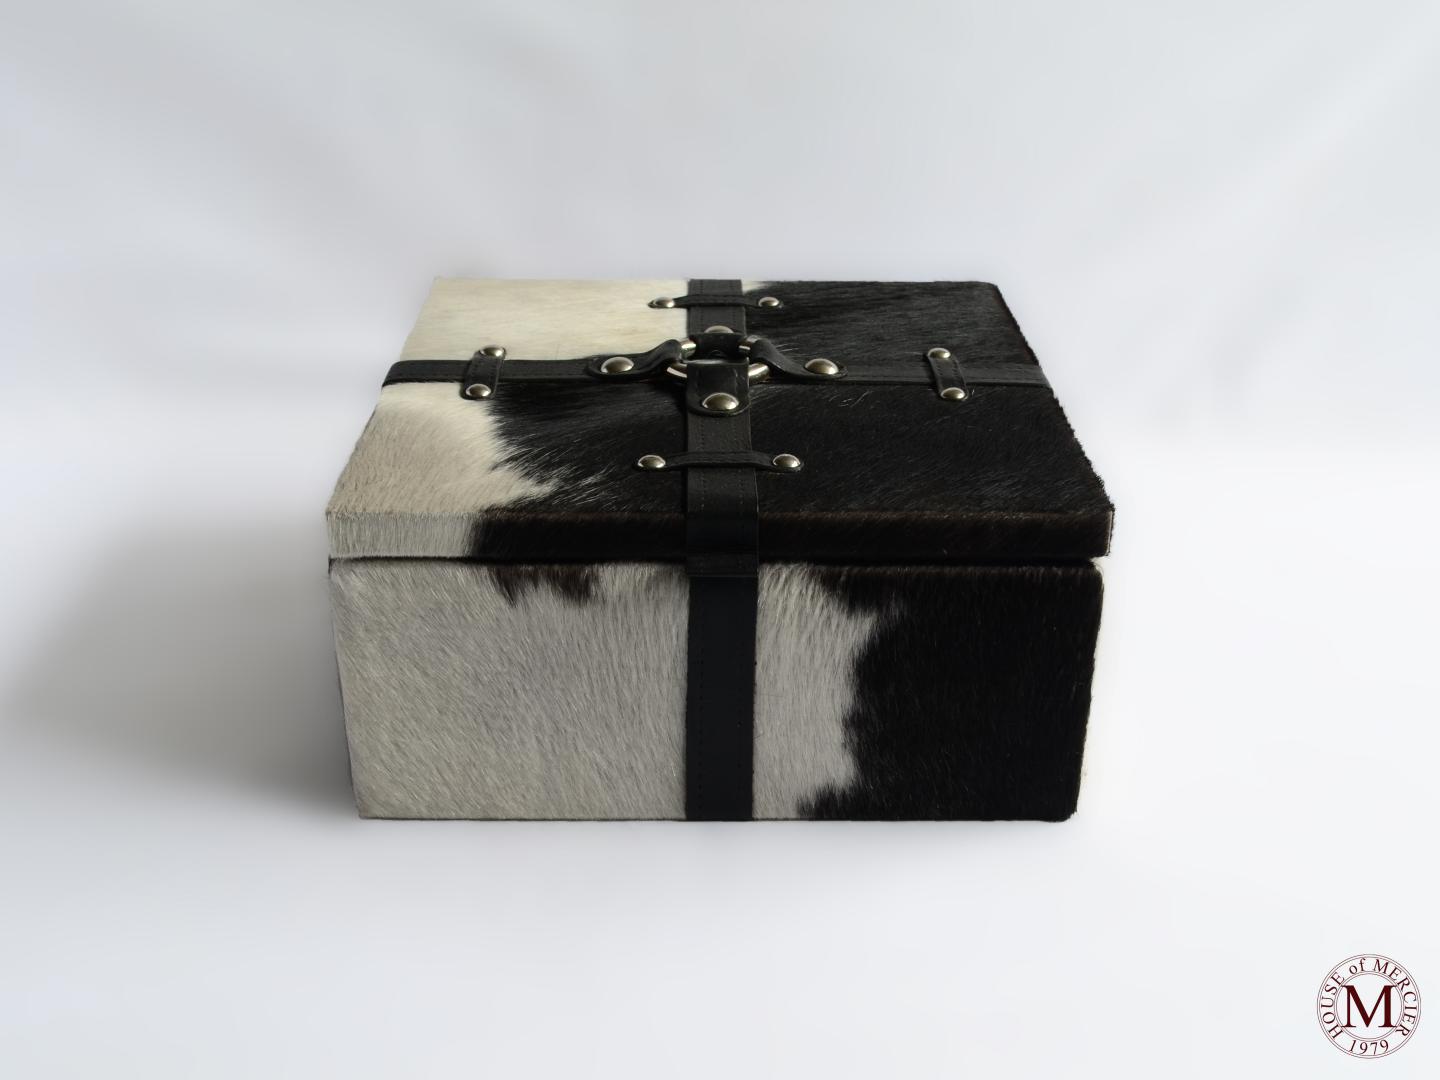 leather Cowhide box cinto with hardware straps fake stitches/stitchless